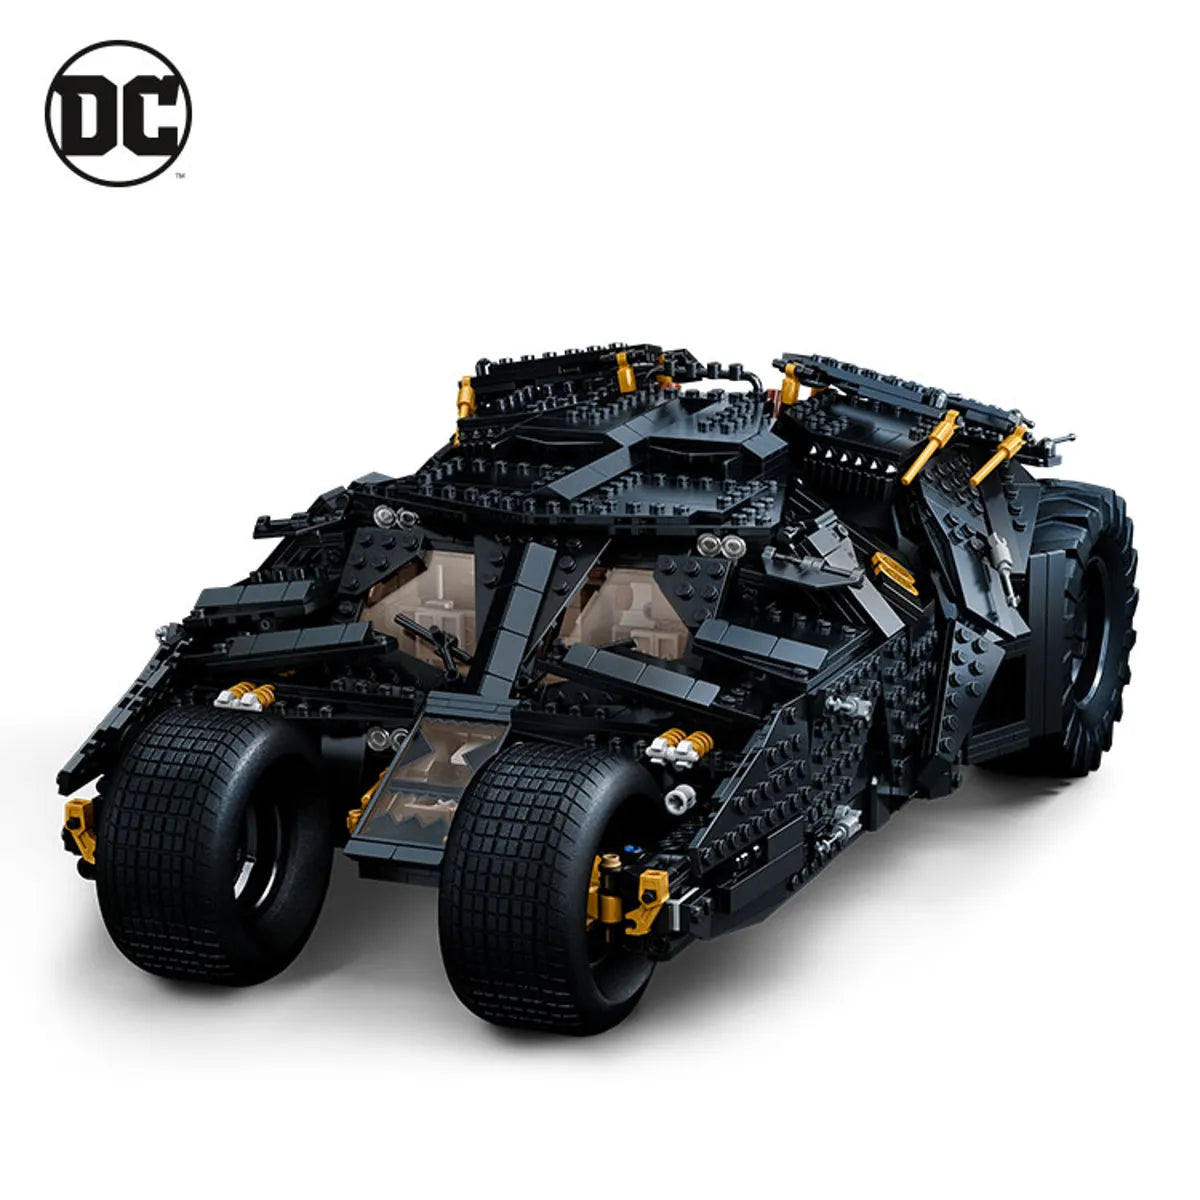 A new Lego Batman Tumbler Batmobile is on the way, and it looks awesome